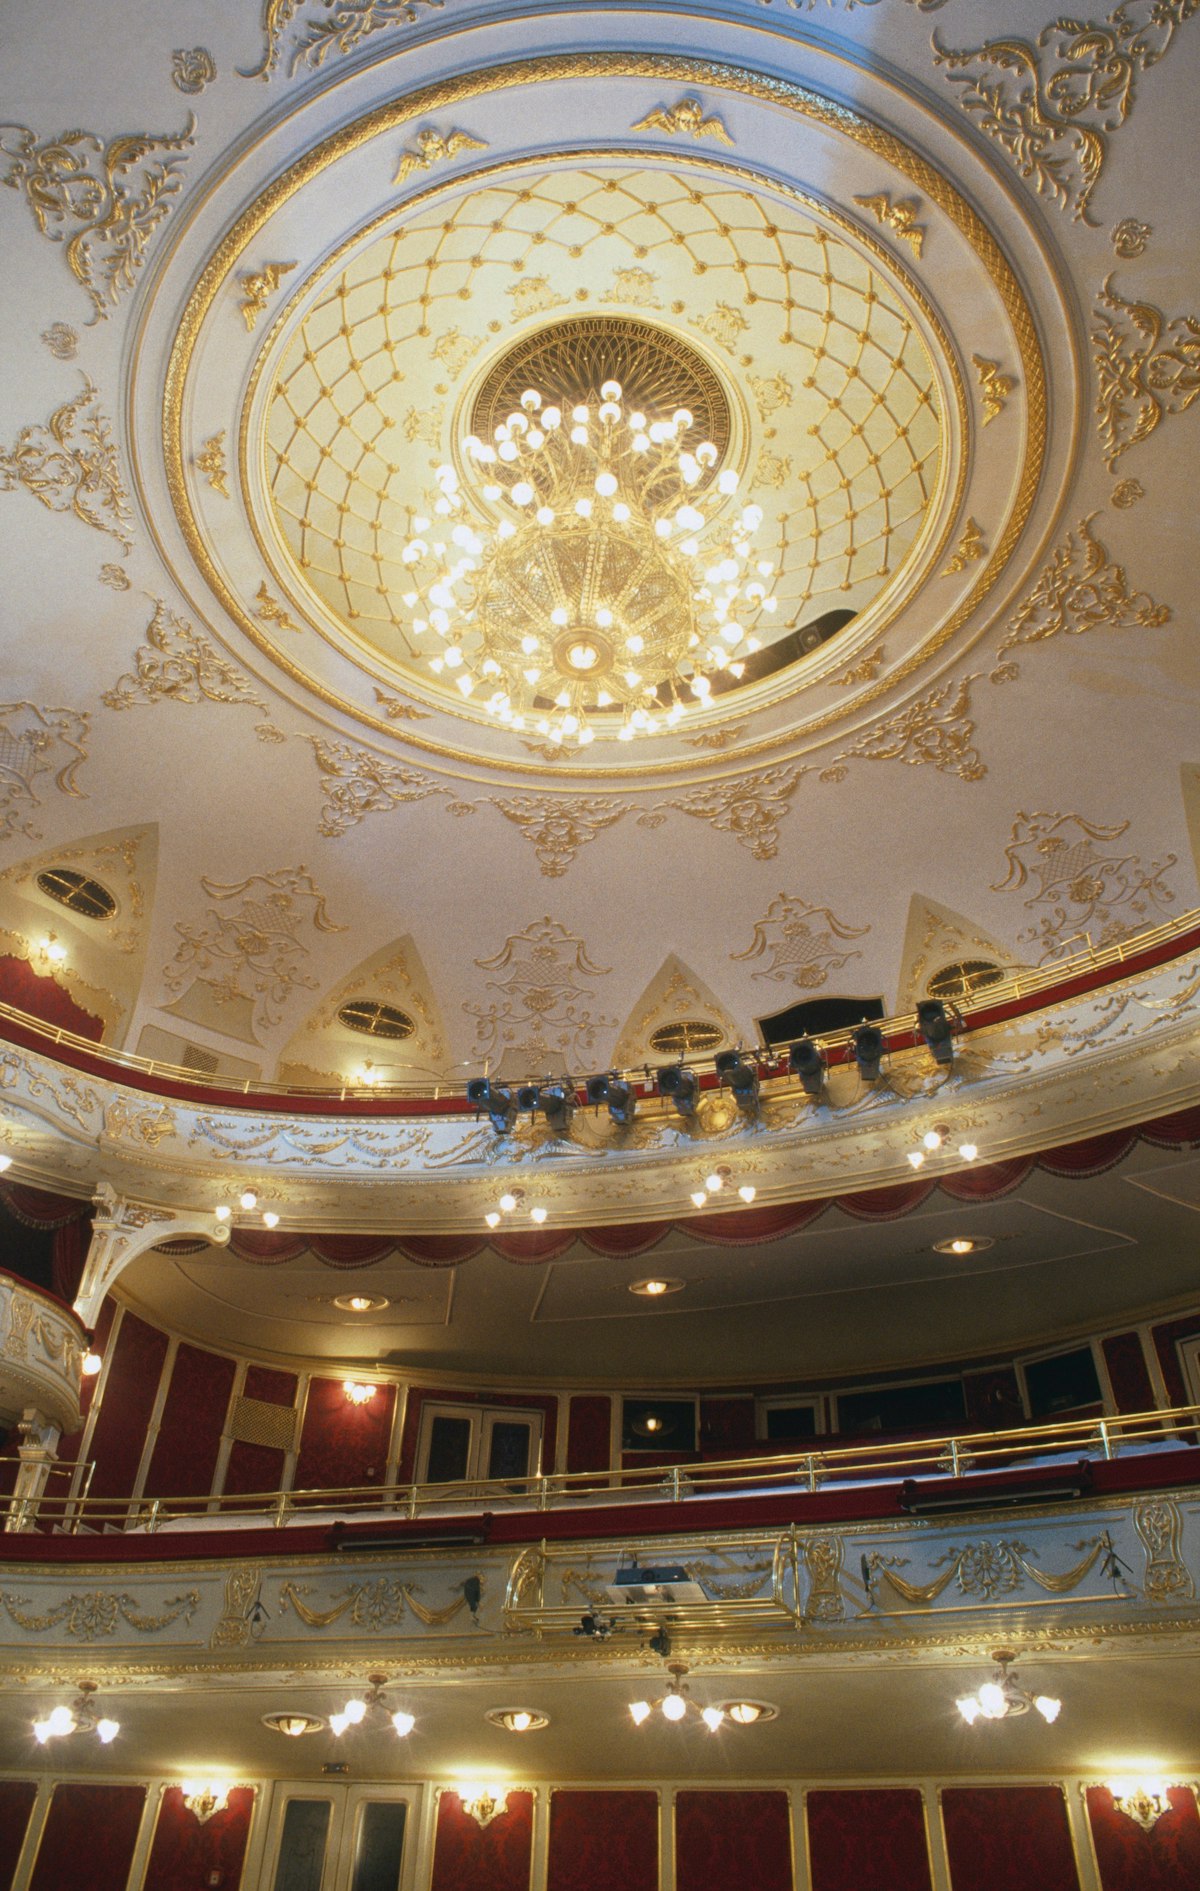 Decorated ceiling and galleries at neo-Classical Comedy Theatre.